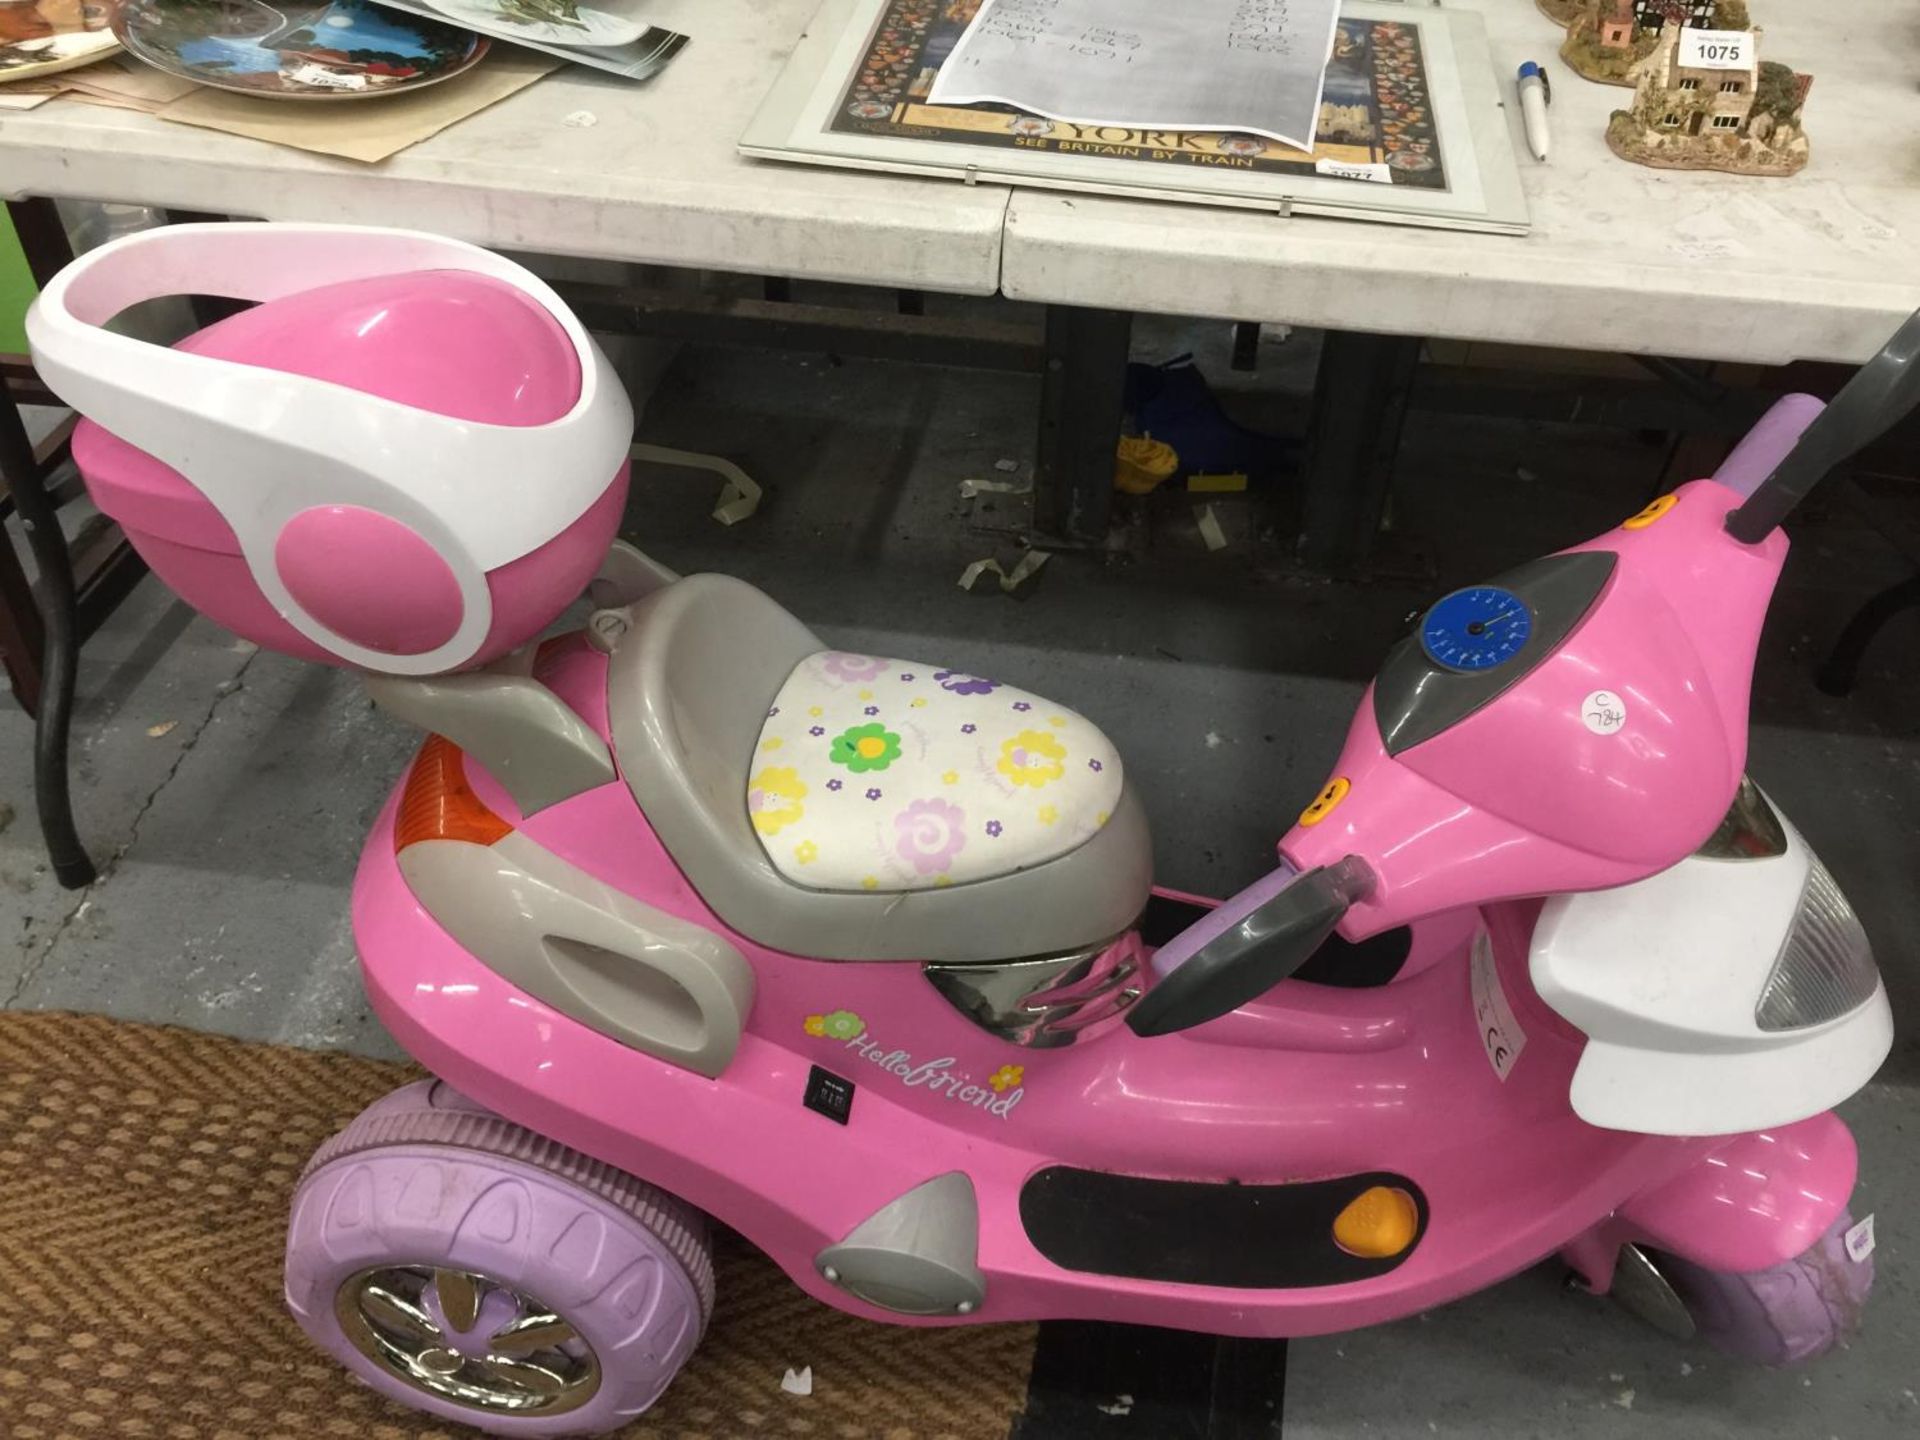 A CHILDREN'S PINK ELECTRIC THREE WHEELED SCOOTER WITH CHARGER - VENDOR STATES IN WORKING ORDER AND